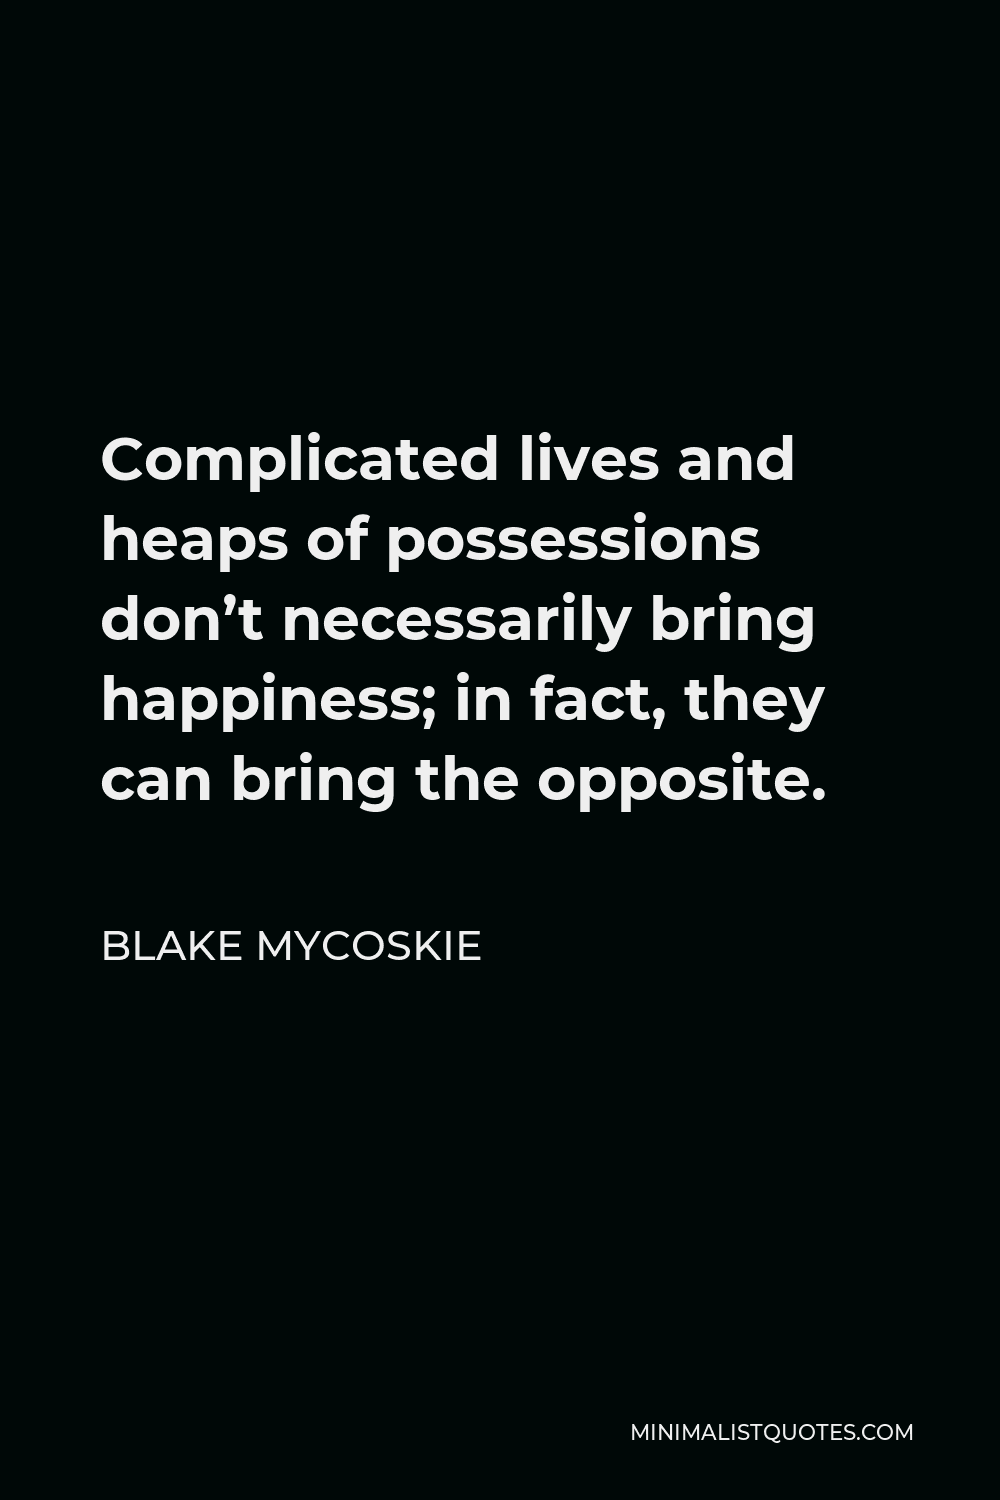 Blake Mycoskie Quote - Complicated lives and heaps of possessions don’t necessarily bring happiness; in fact, they can bring the opposite.